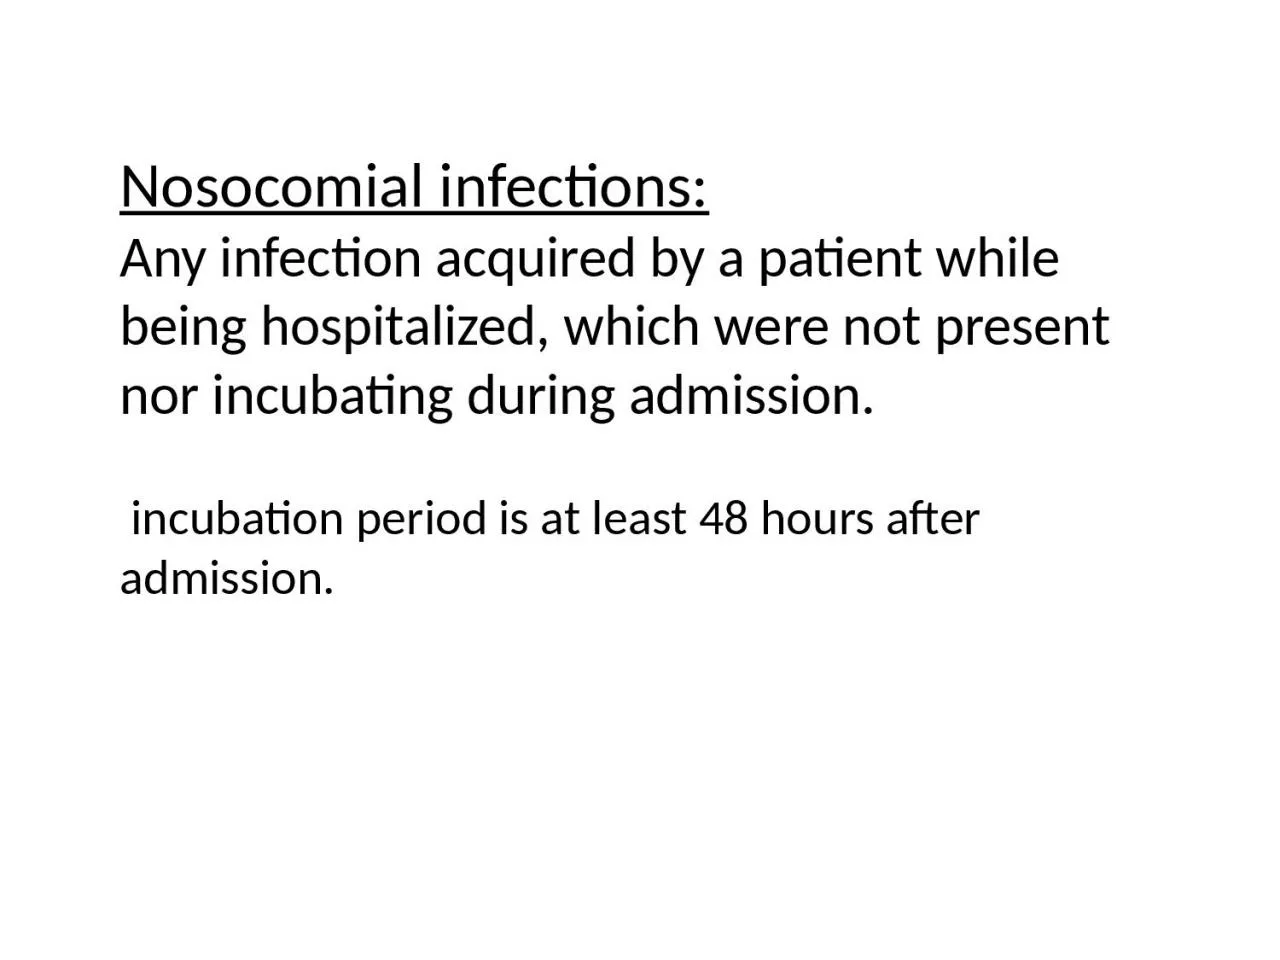 Nosocomial infections: Any infection acquired by a patient while